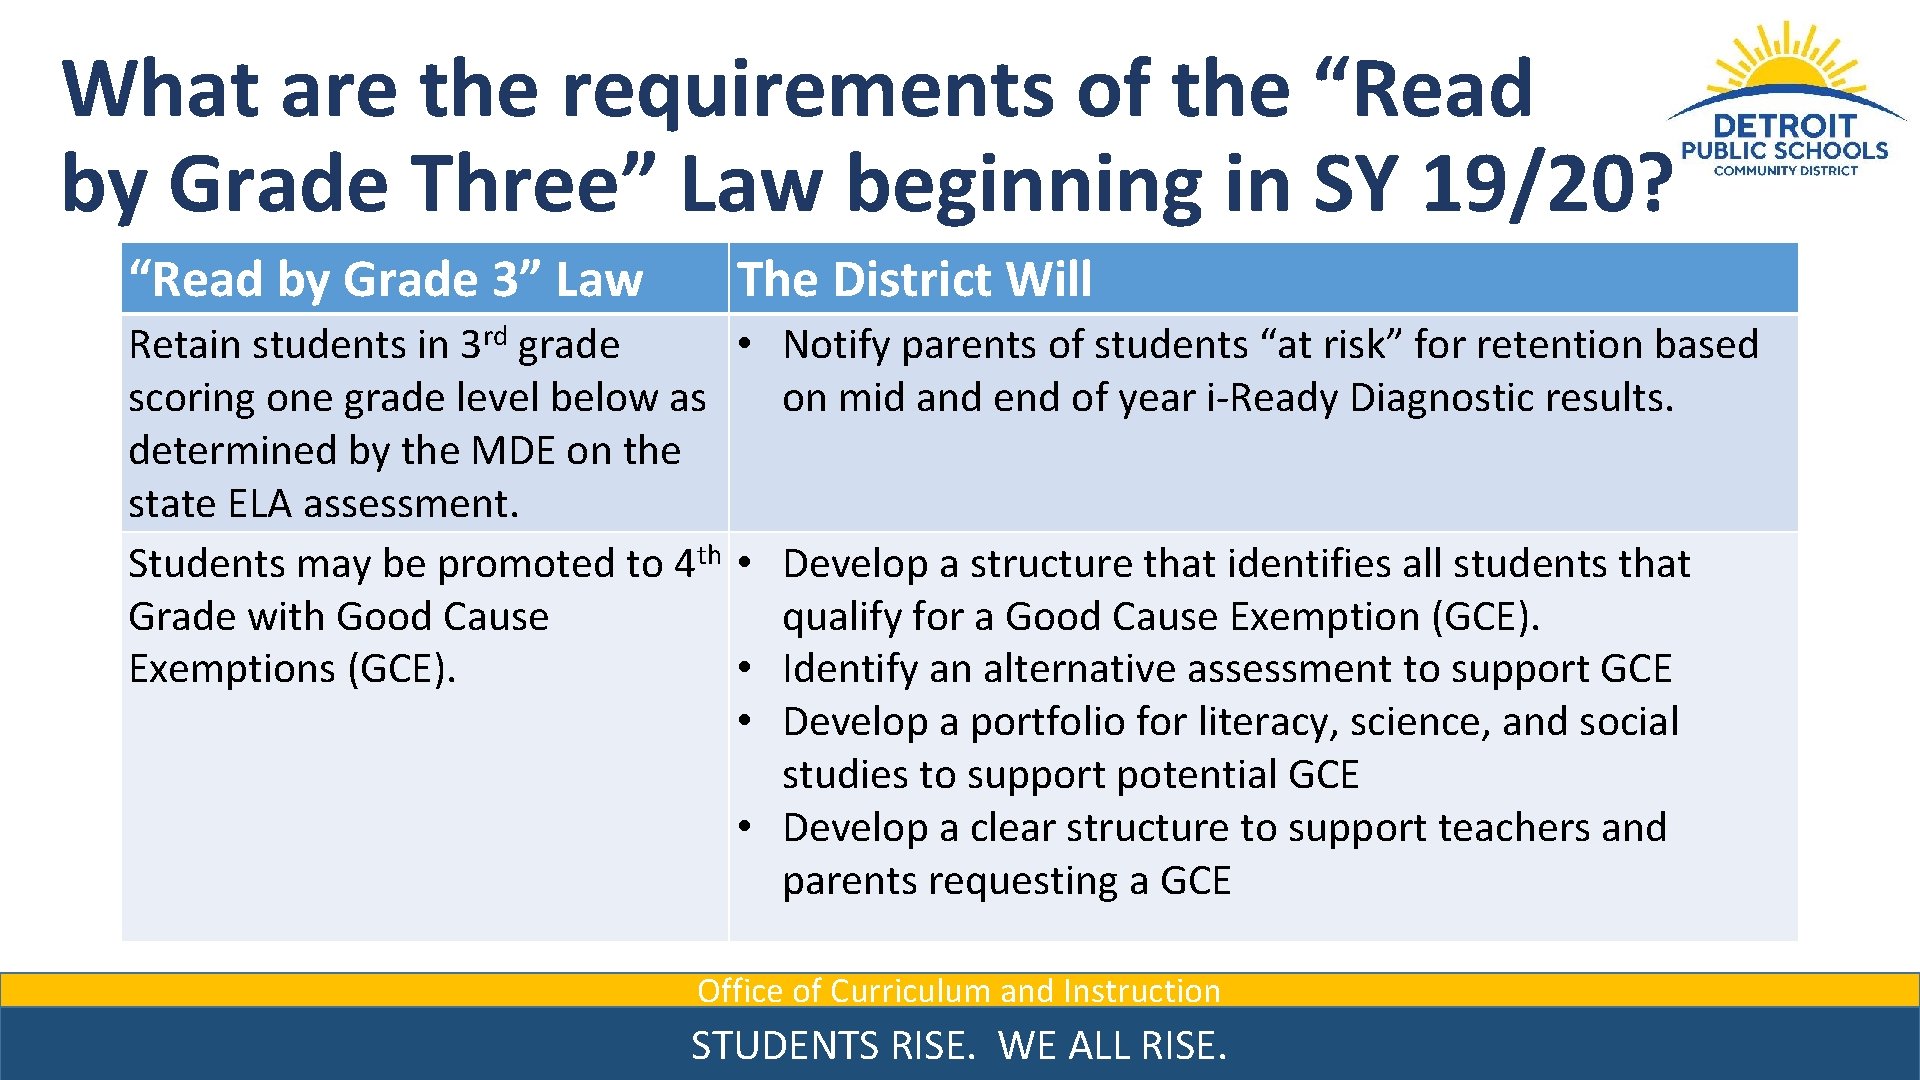 What are the requirements of the “Read by Grade Three” Law beginning in SY